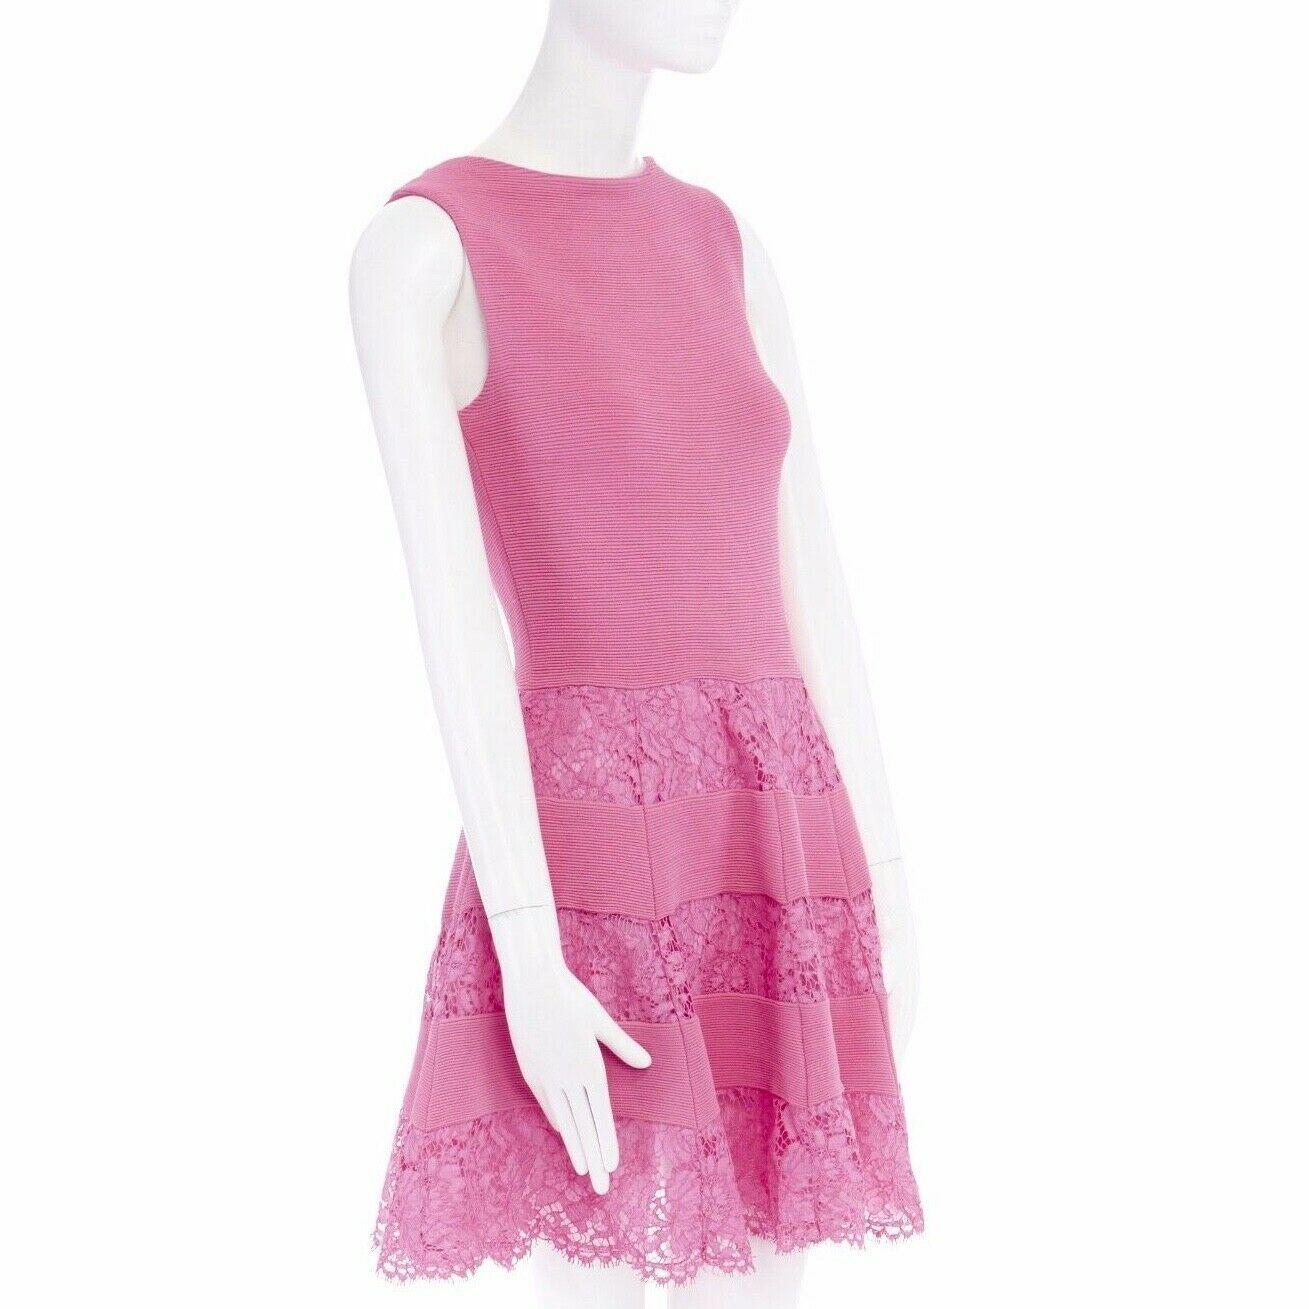 Women's new VALENTINO pink ribbed stretch floral lace paneled fit flare dress M